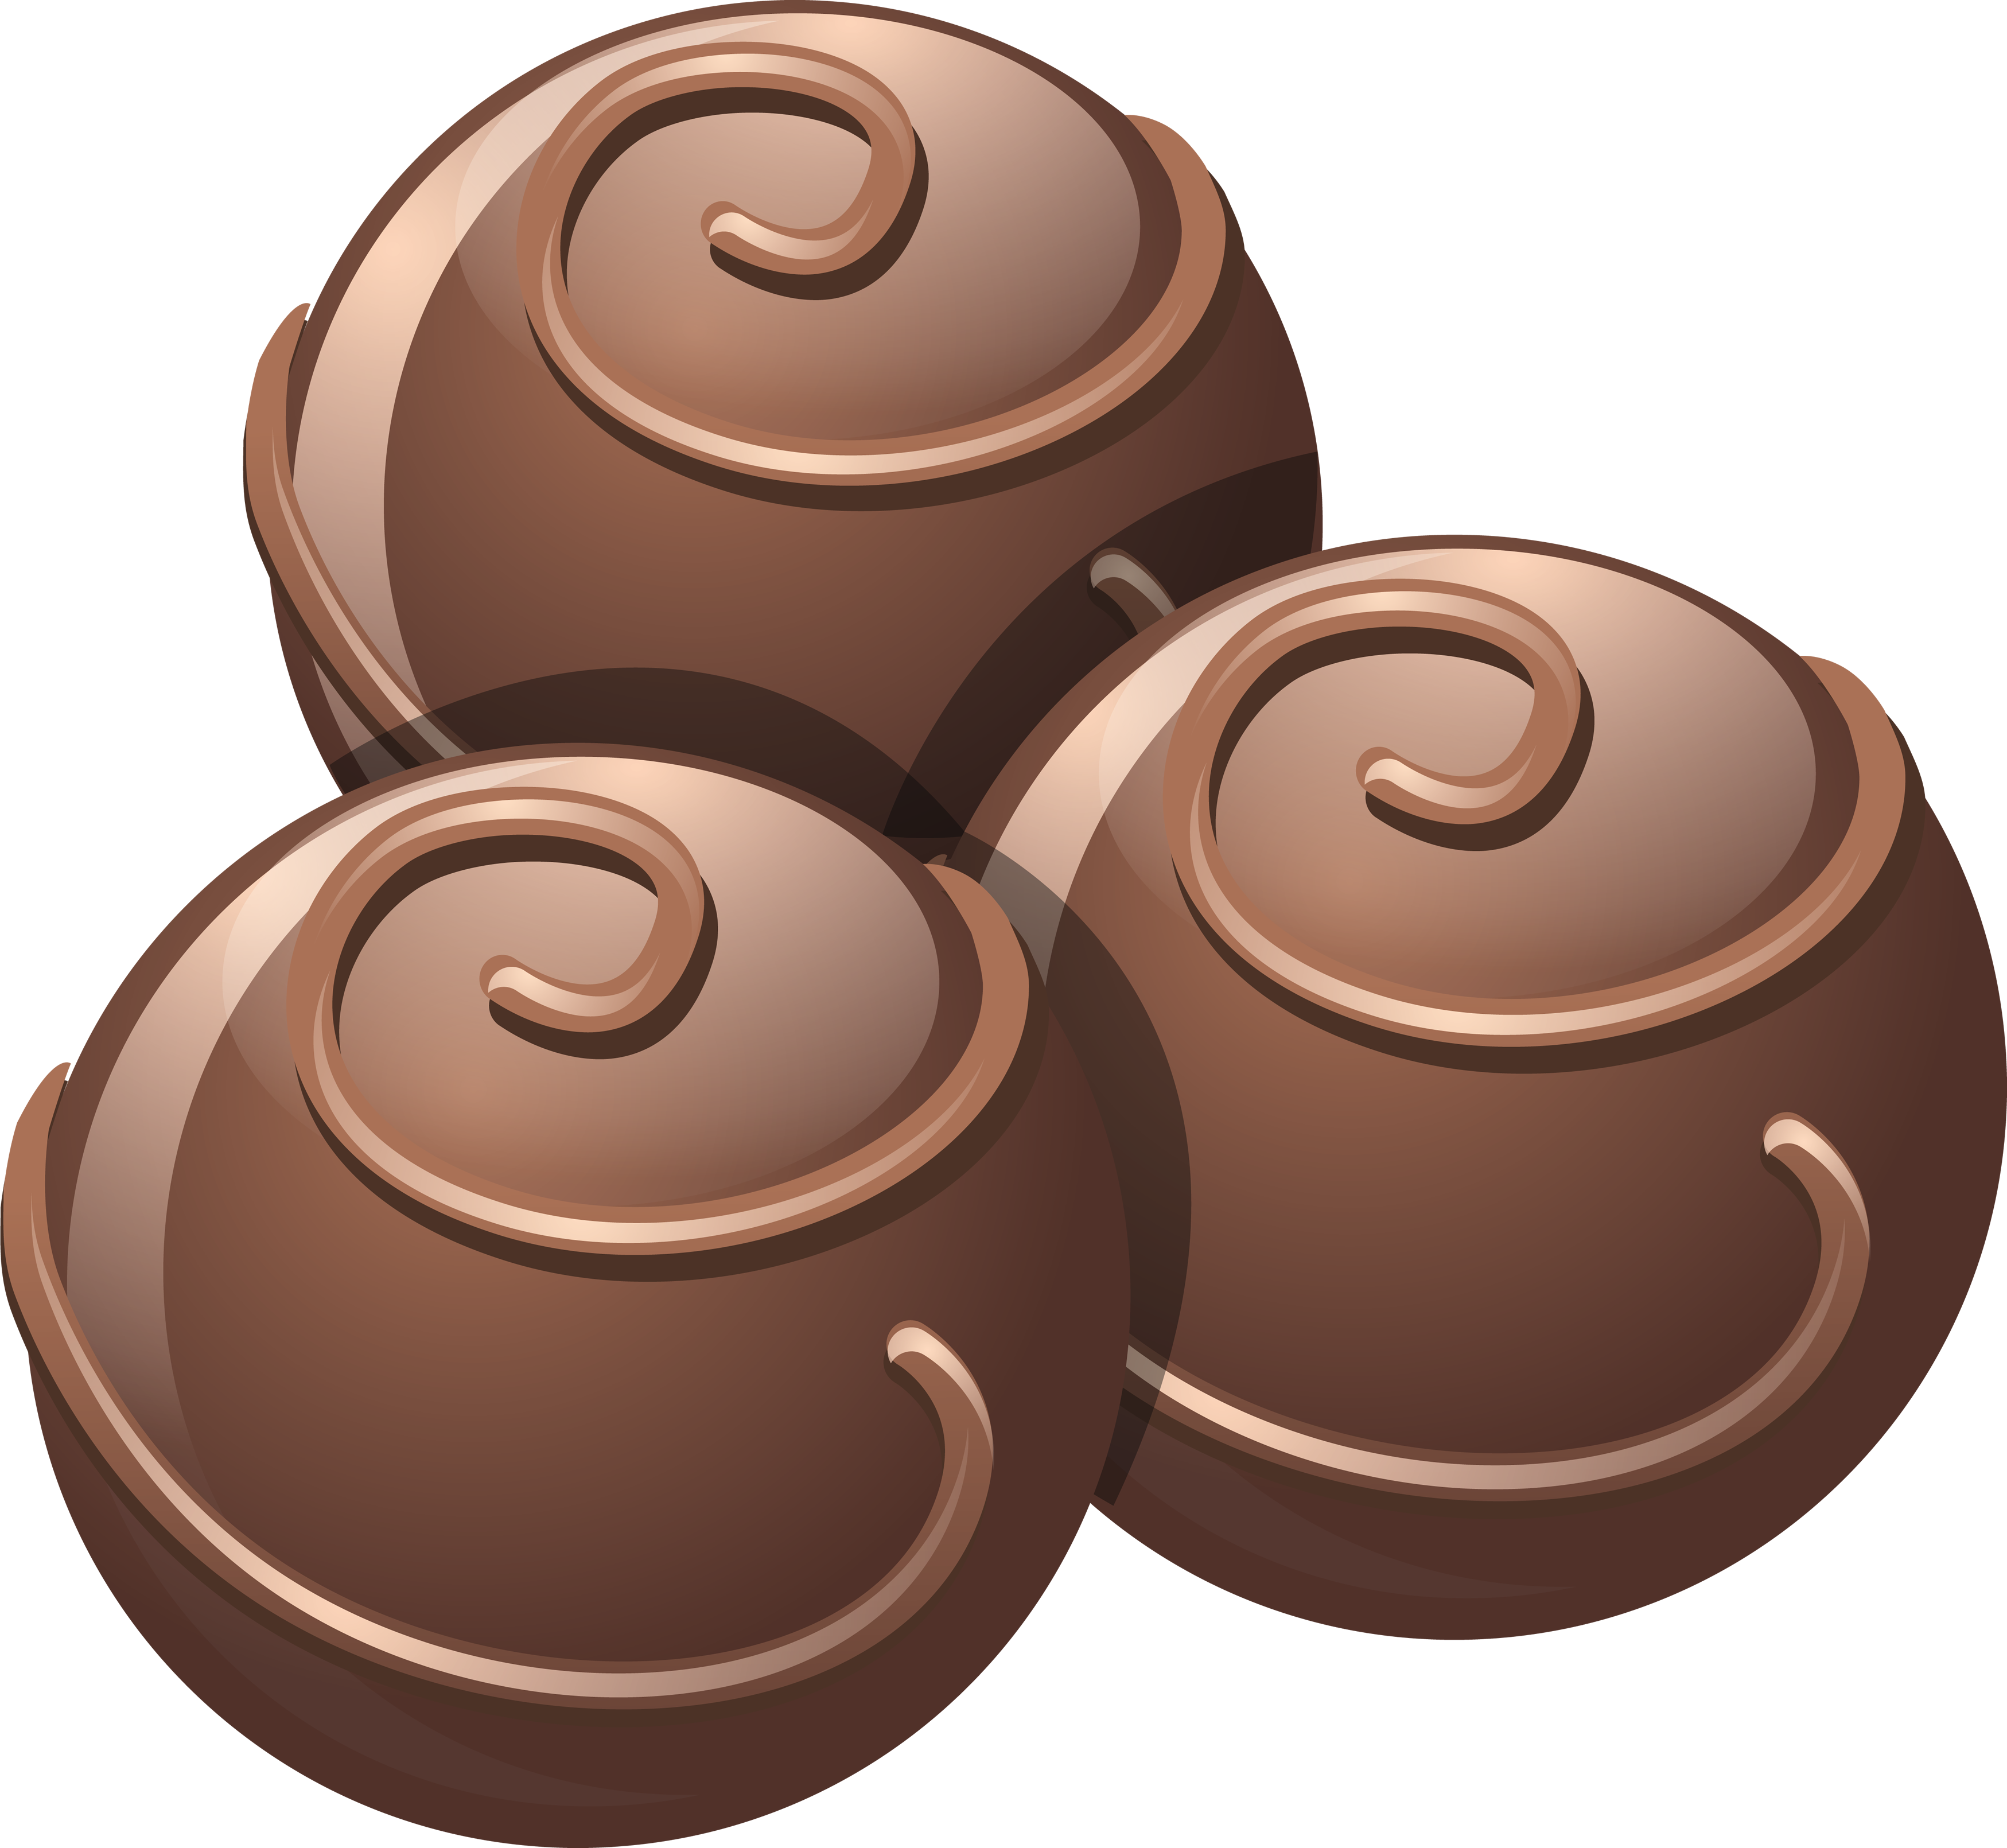 Free Chocolate Transparent Background, Download Free Clip